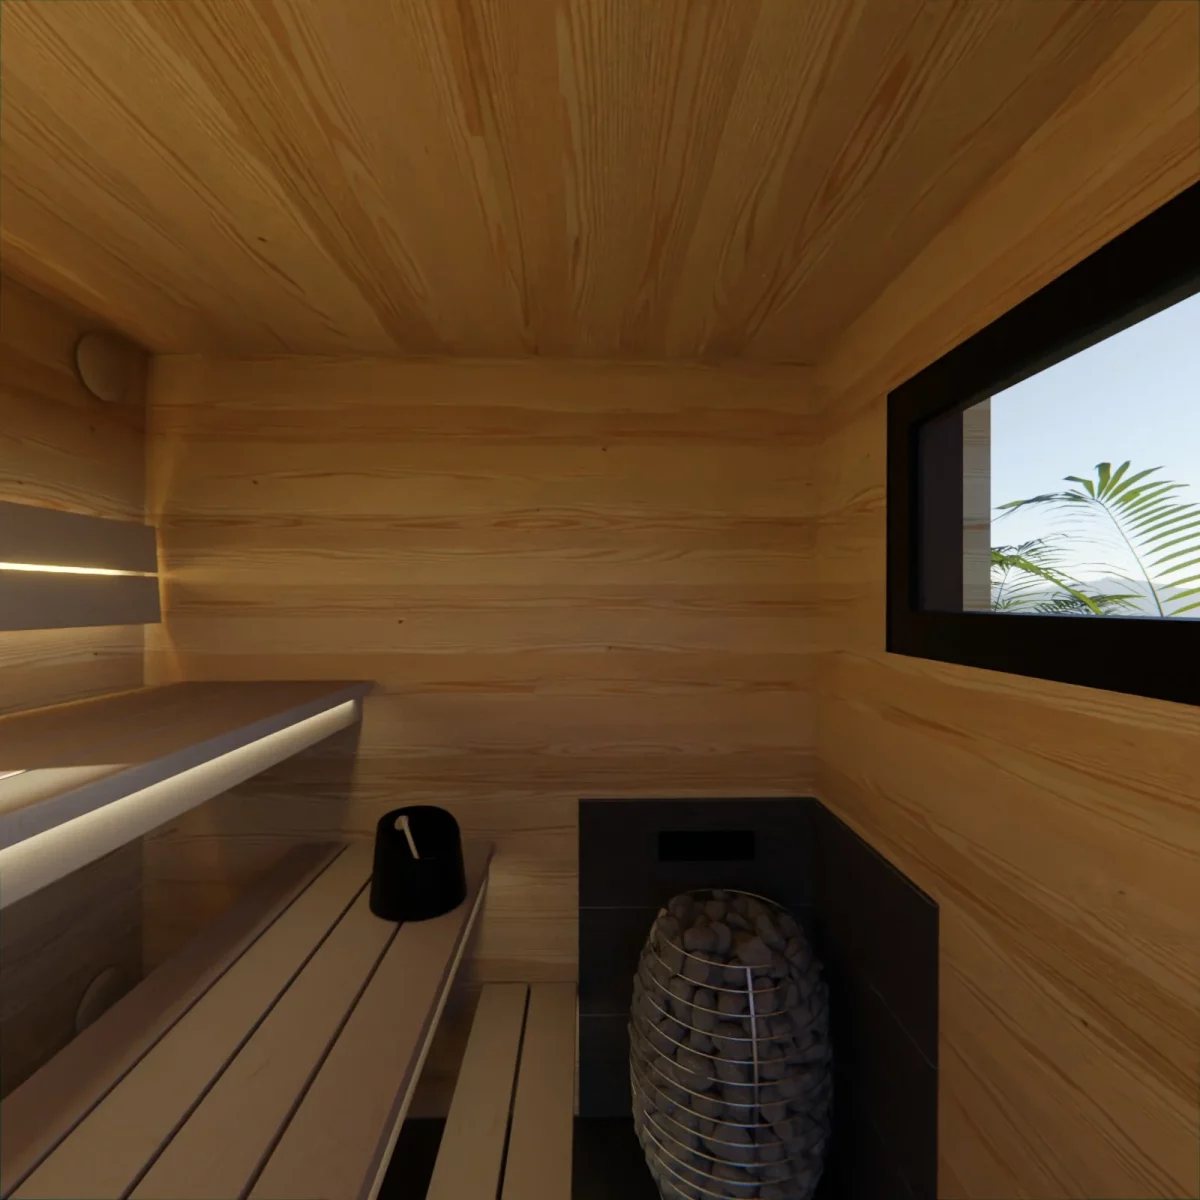 Inside live sauna from sauna plans with window and 3 bench heights